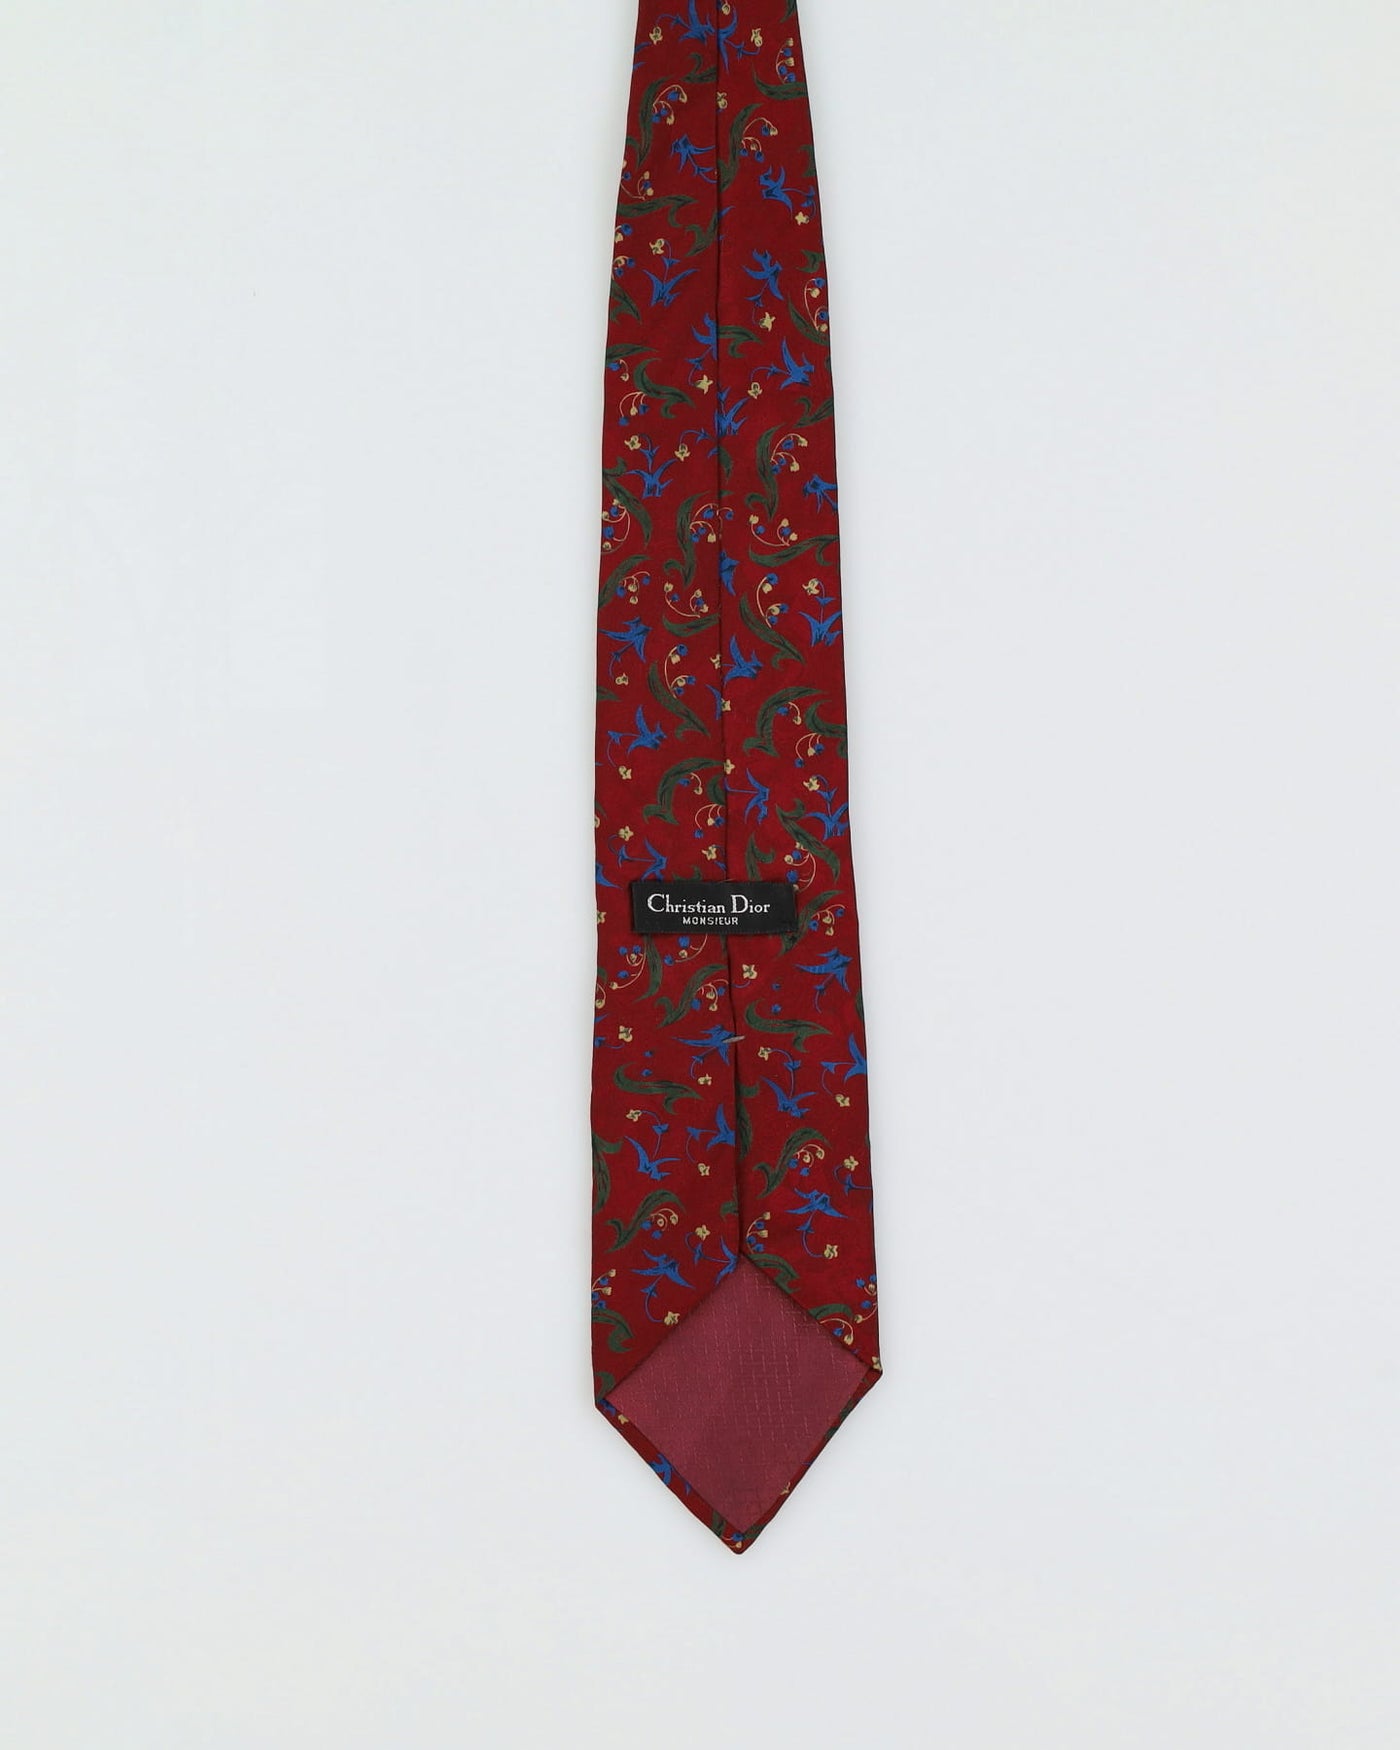 Vintage 90s Christian Dior Red / Green / Blue Patterned Tie